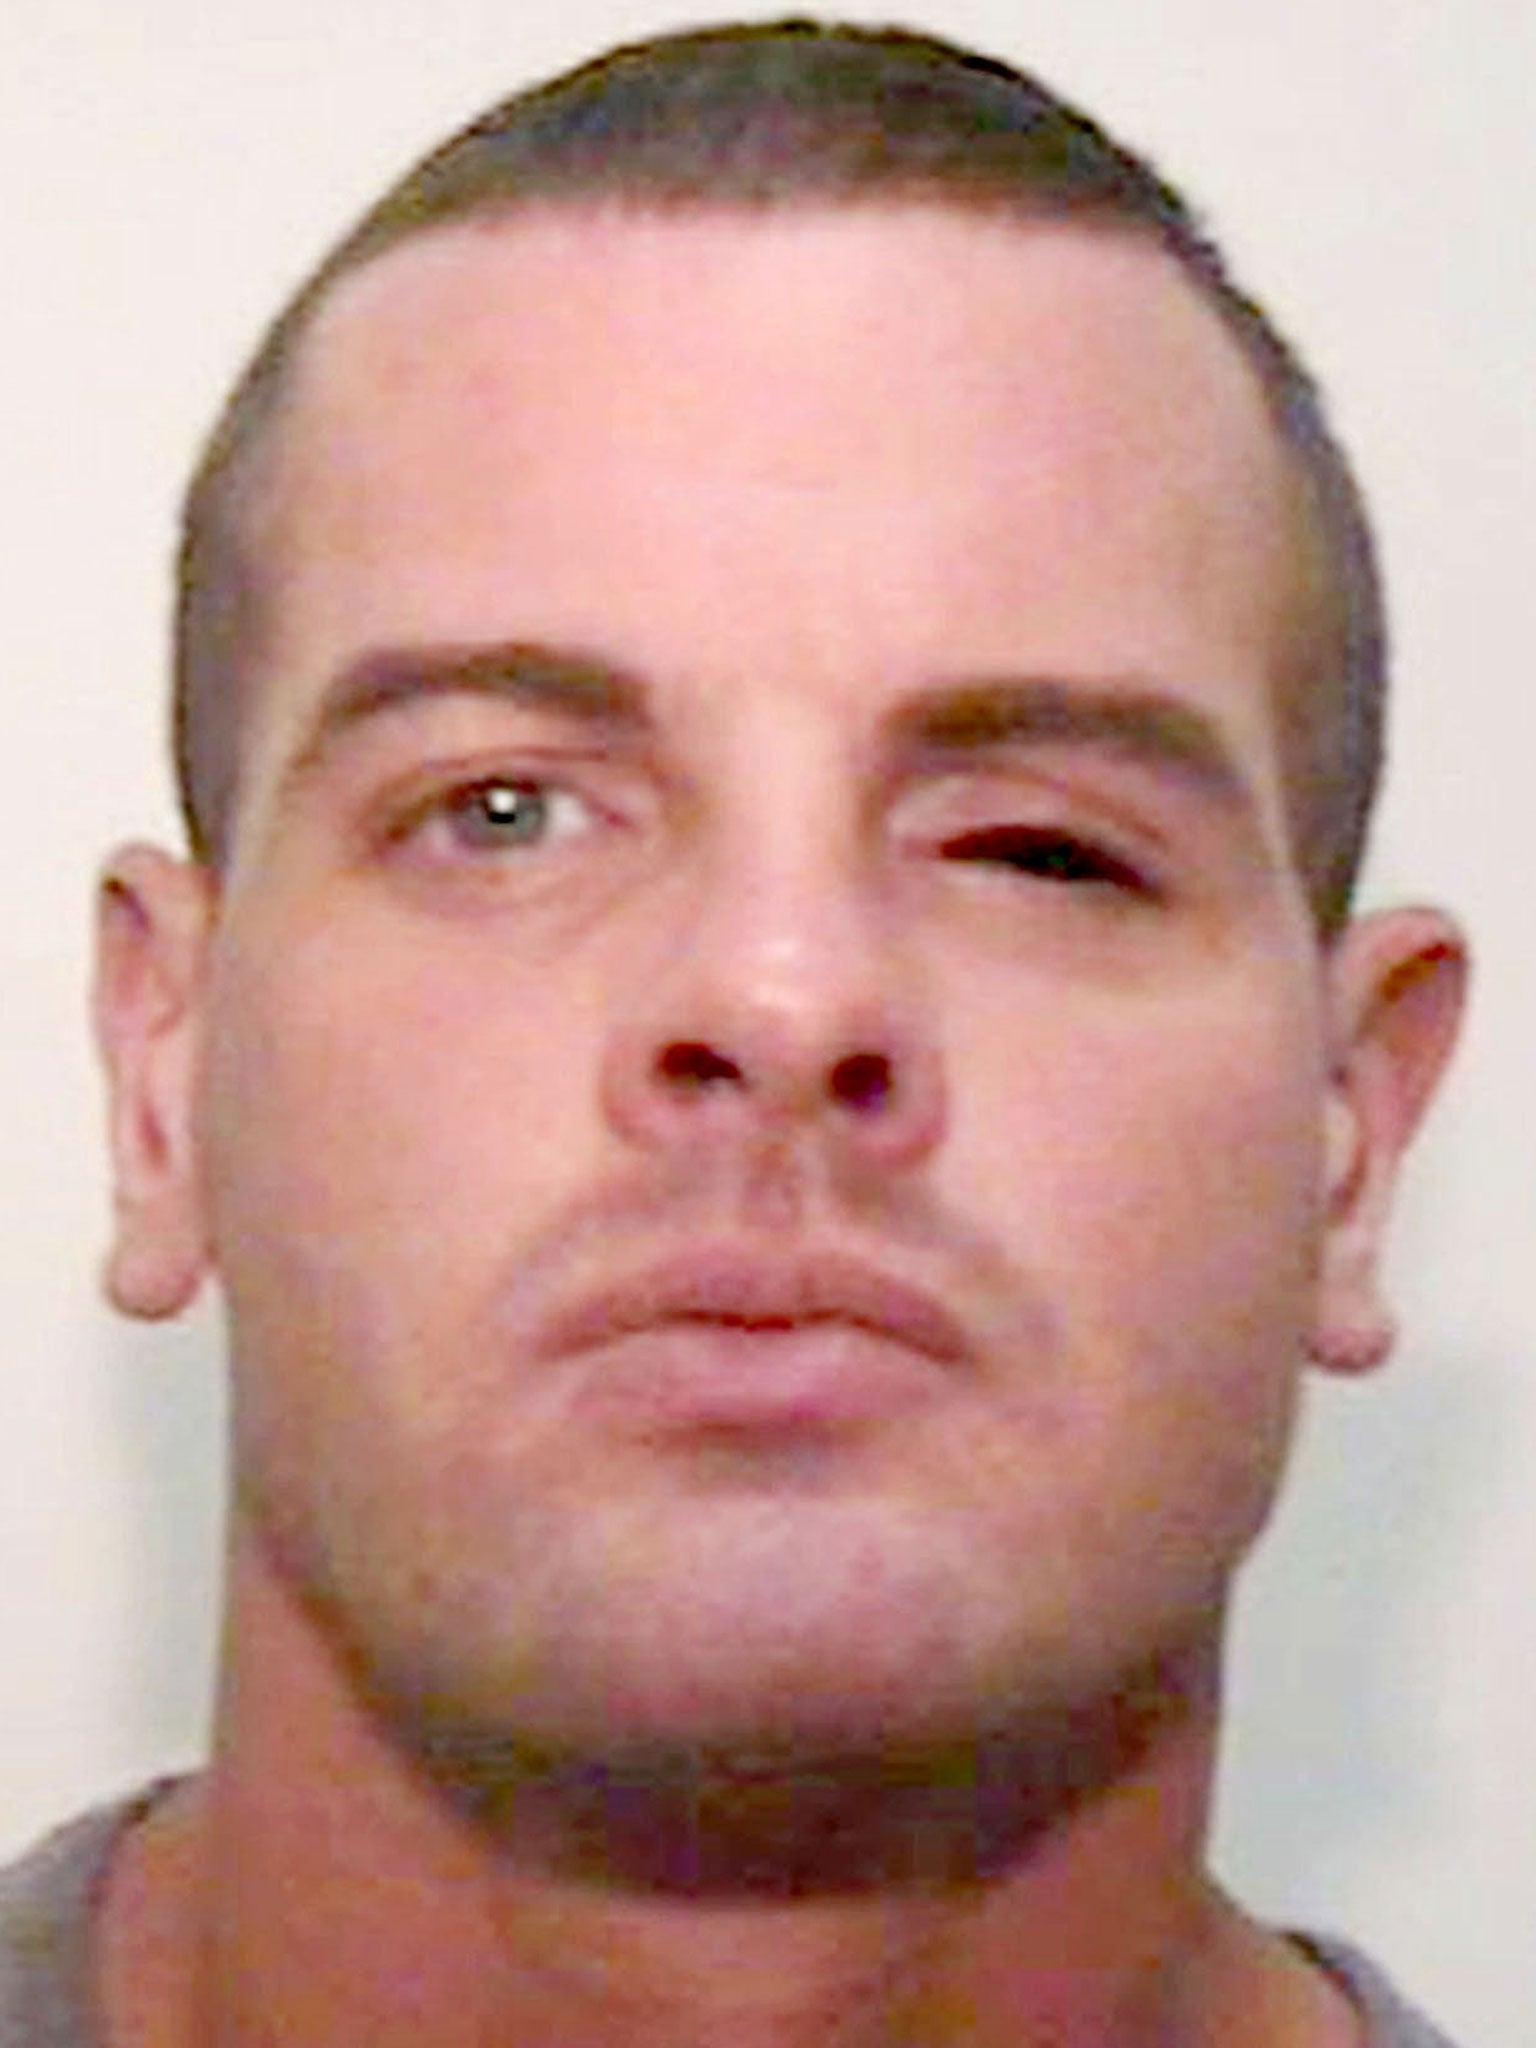 Dale Cregan, who was already wanted by police for the double murder of a father and son, lured the officers with a bogus call before killing them in a gun and grenade attack